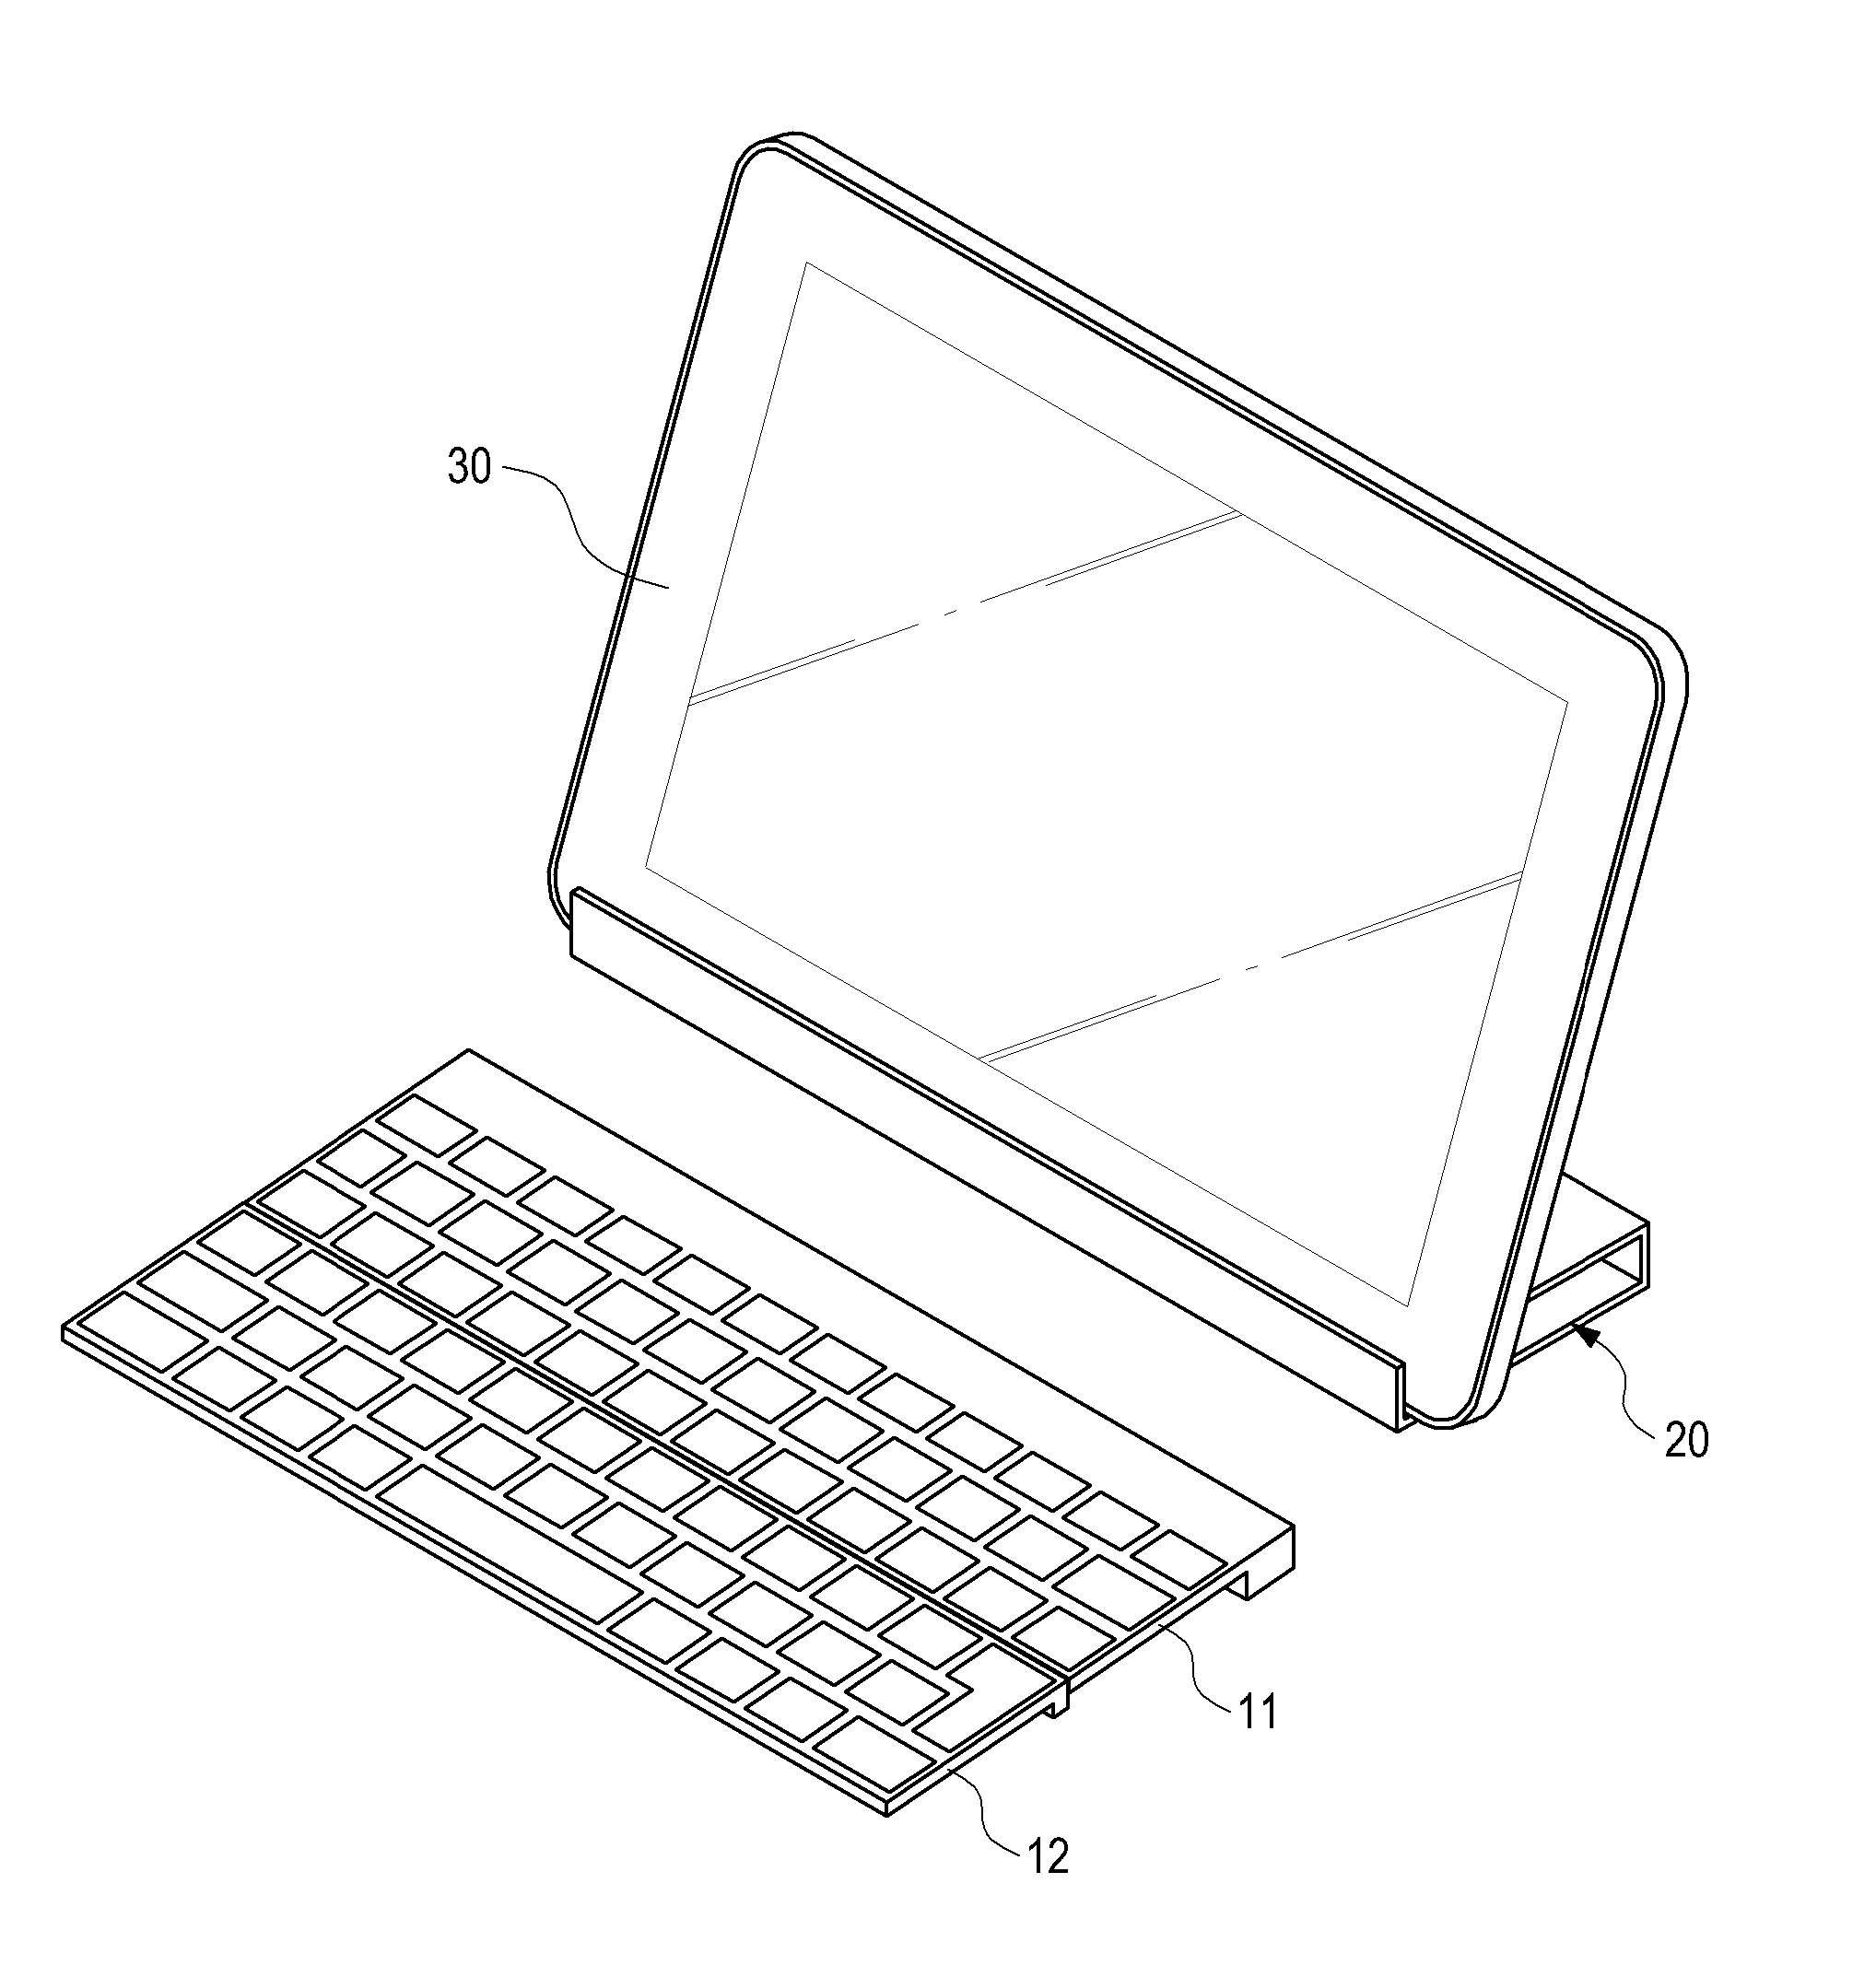 Keyboard unit with cradling function